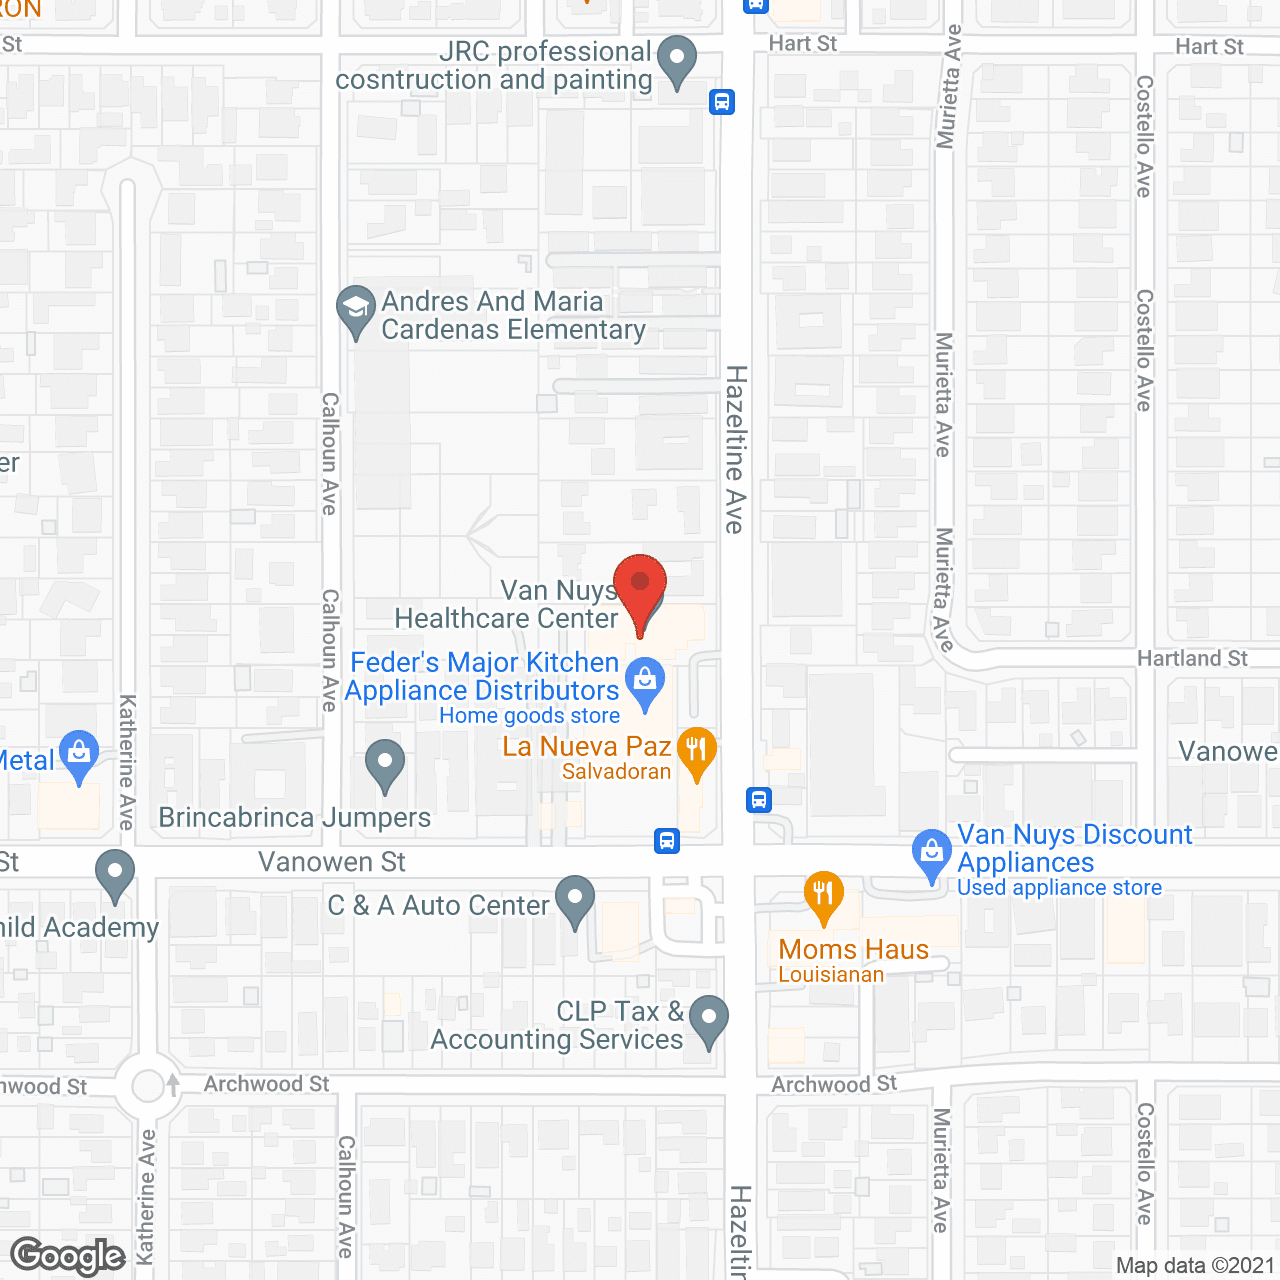 Van Nuys Health Care Care in google map